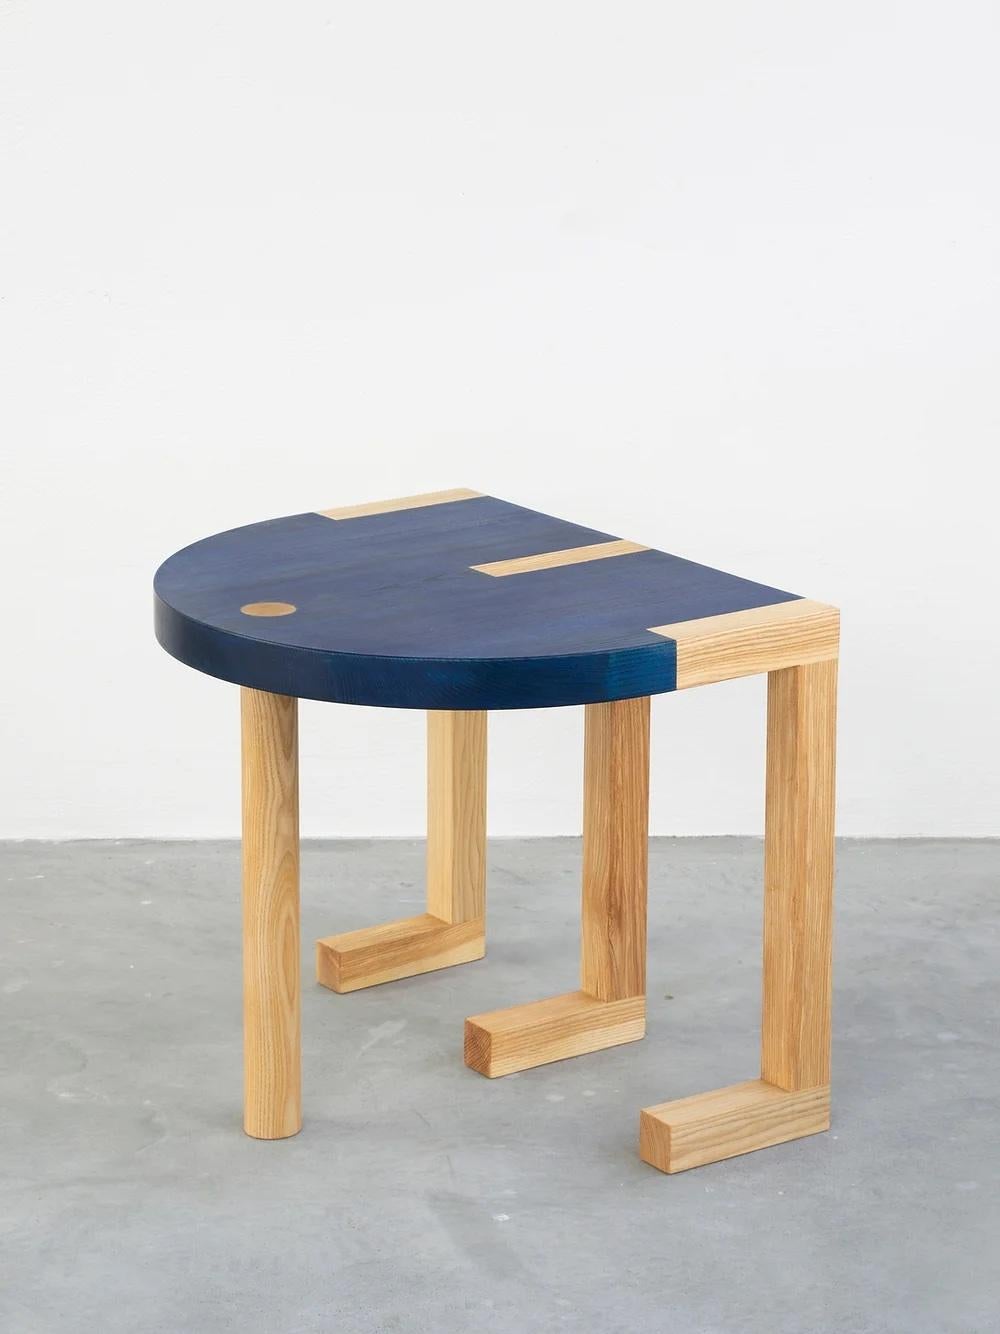 TRN Side Table
Model shown: TRN 3, Blue and natural wood

Material: Ash wood, covered with a natural wax 
Care: Clean with a dry cloth, no water, no direct sunlight 

Dimensions: 
H: 45 cm (17,7